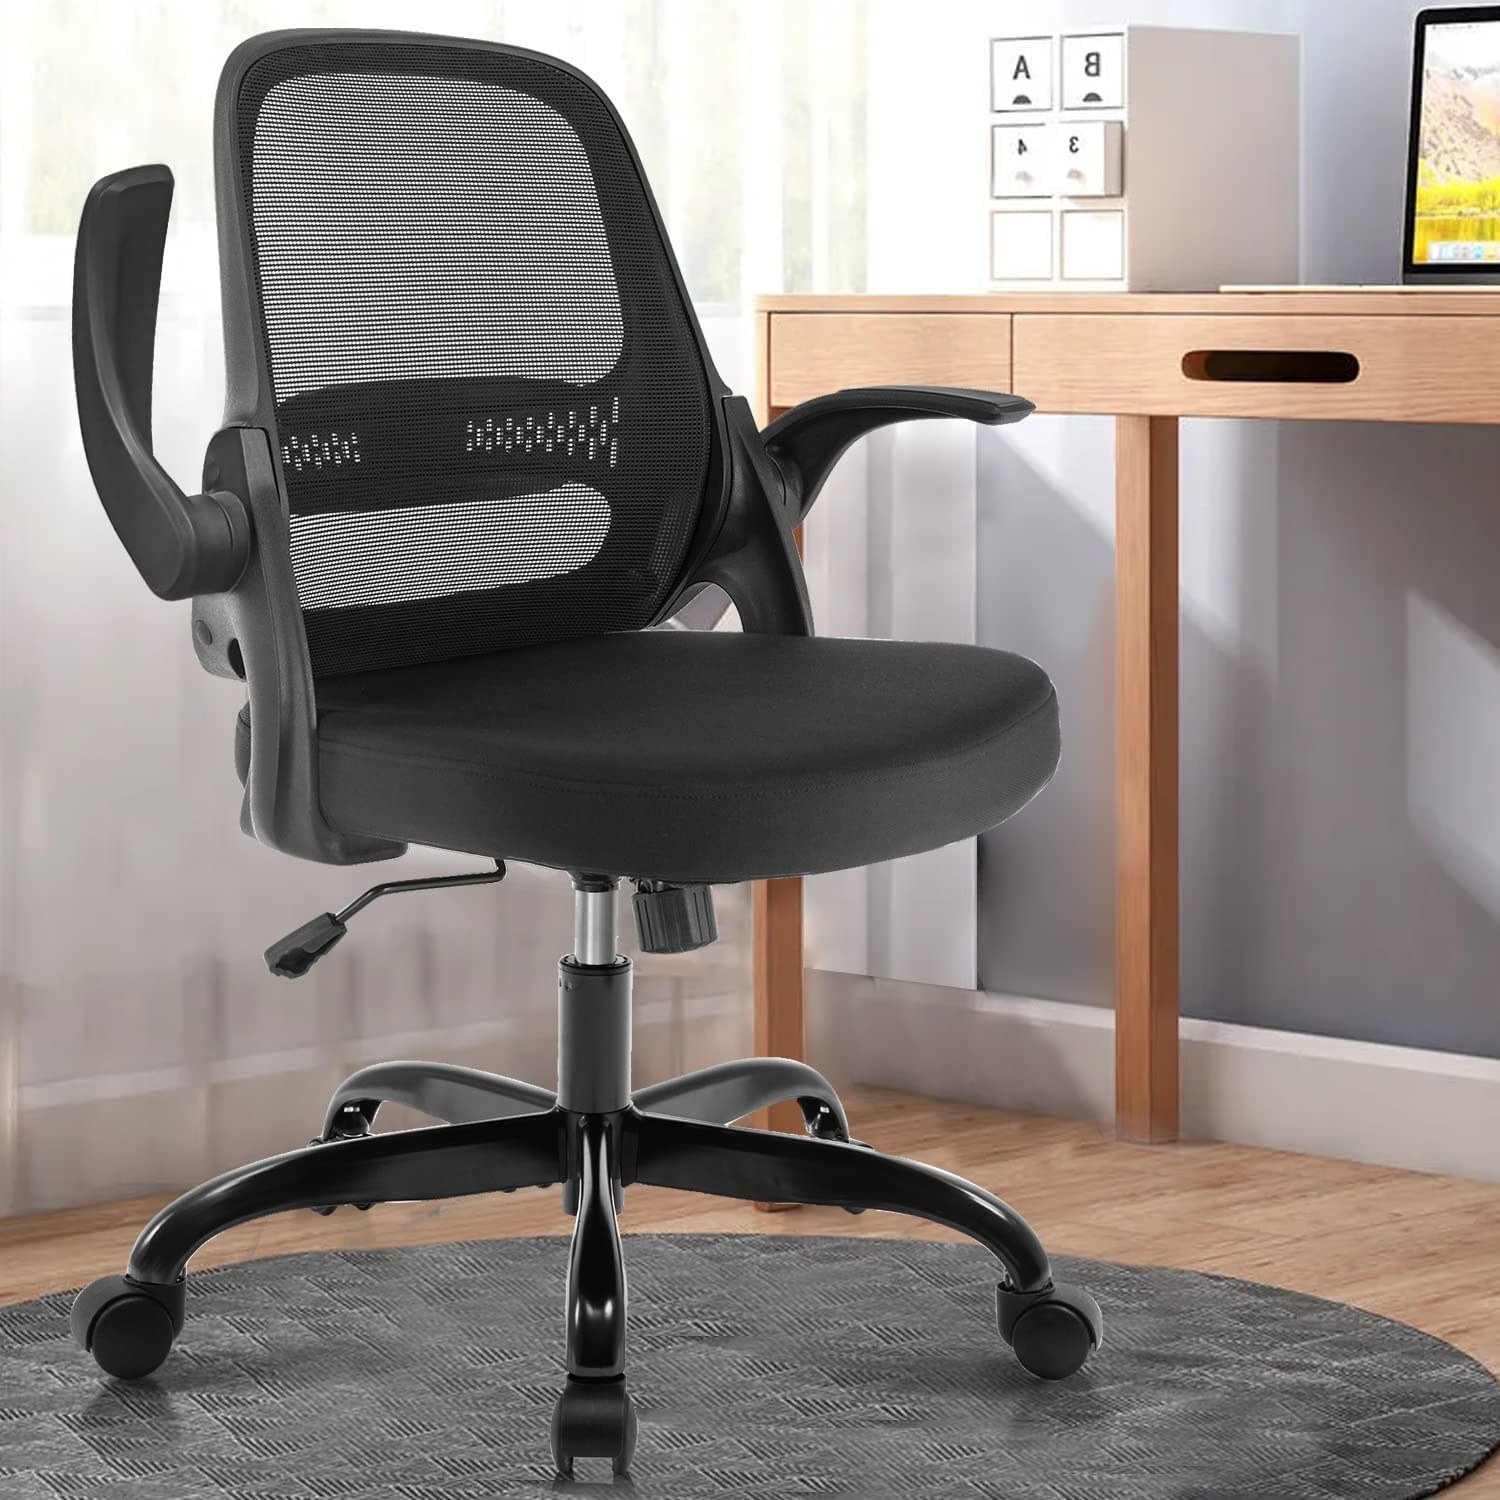 The chair in an office